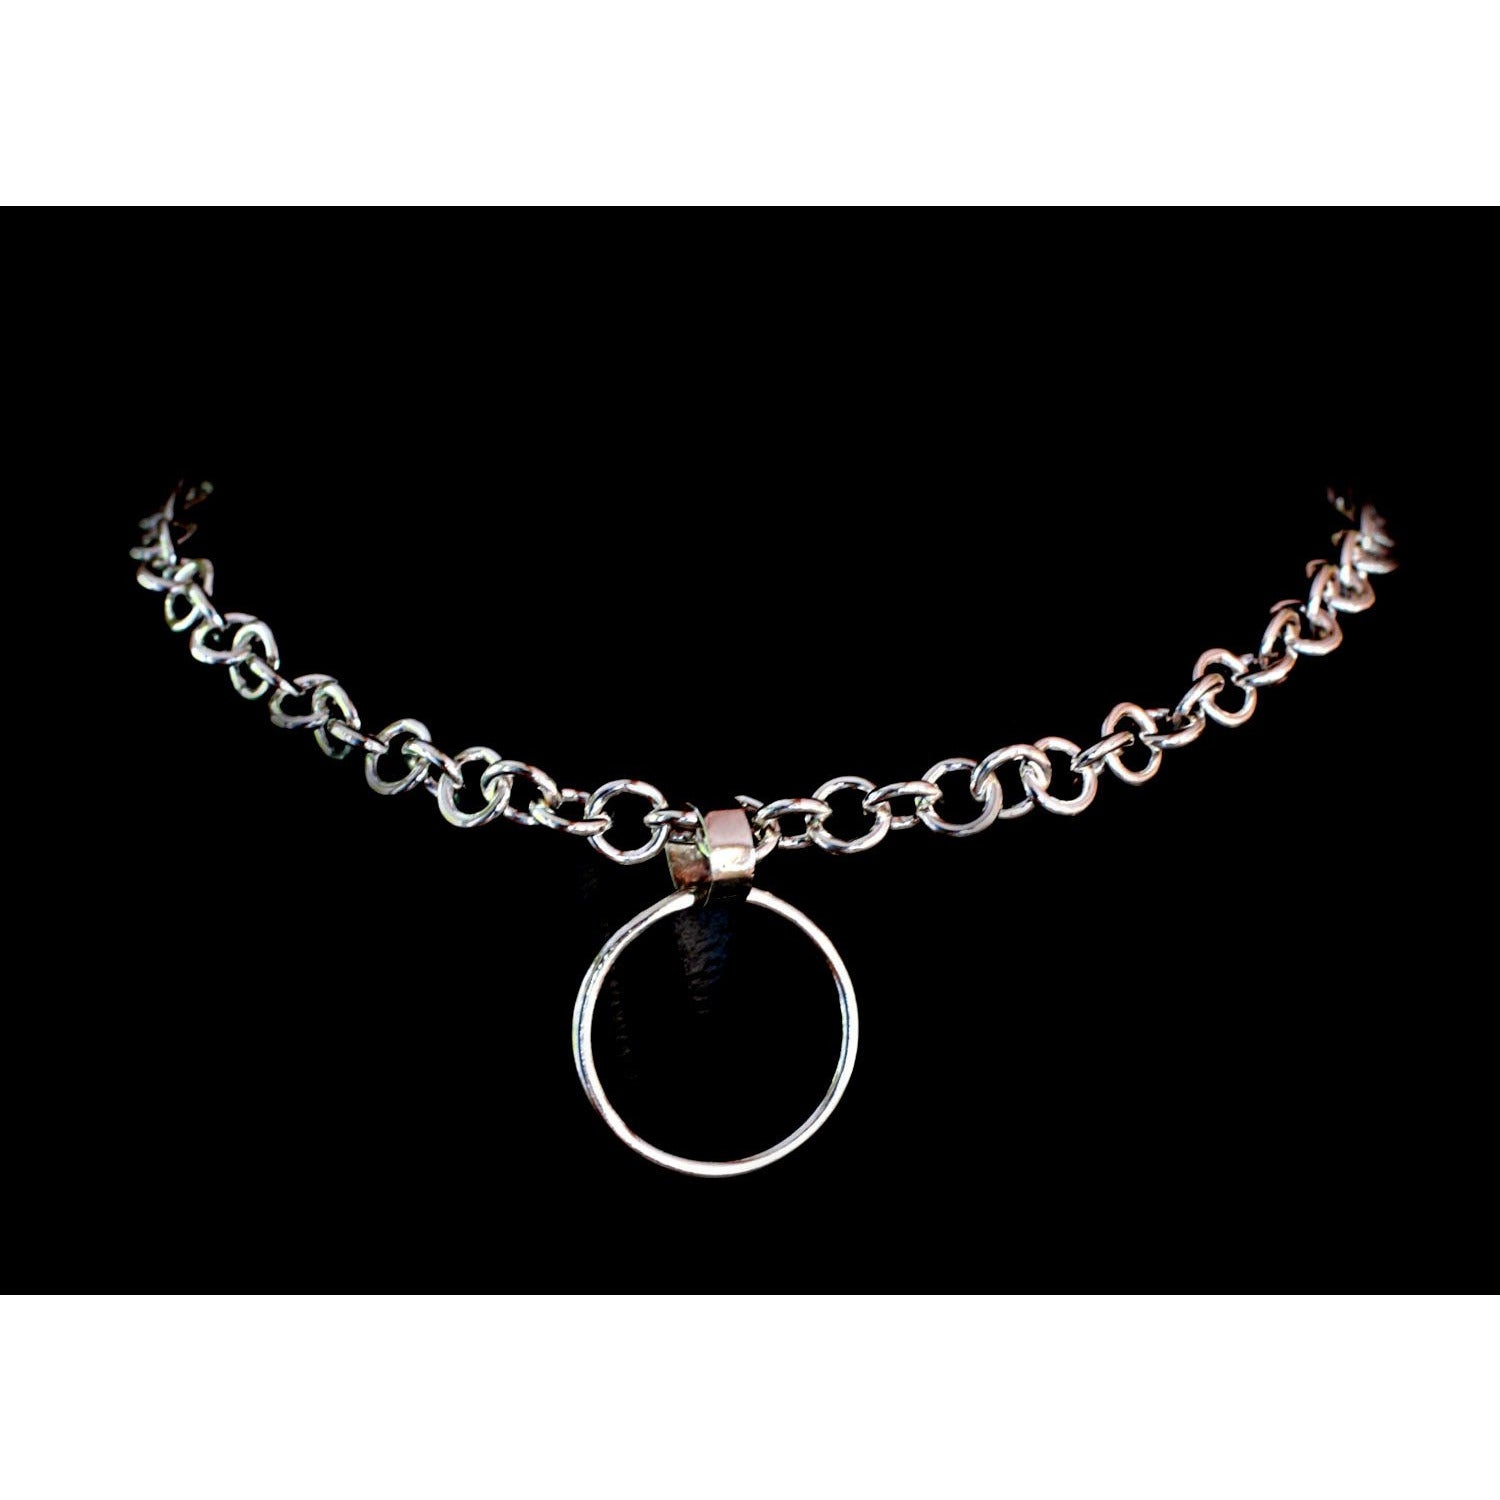 Sterling silver heavy chain collar choker necklace with silver O Ring. Made to order.